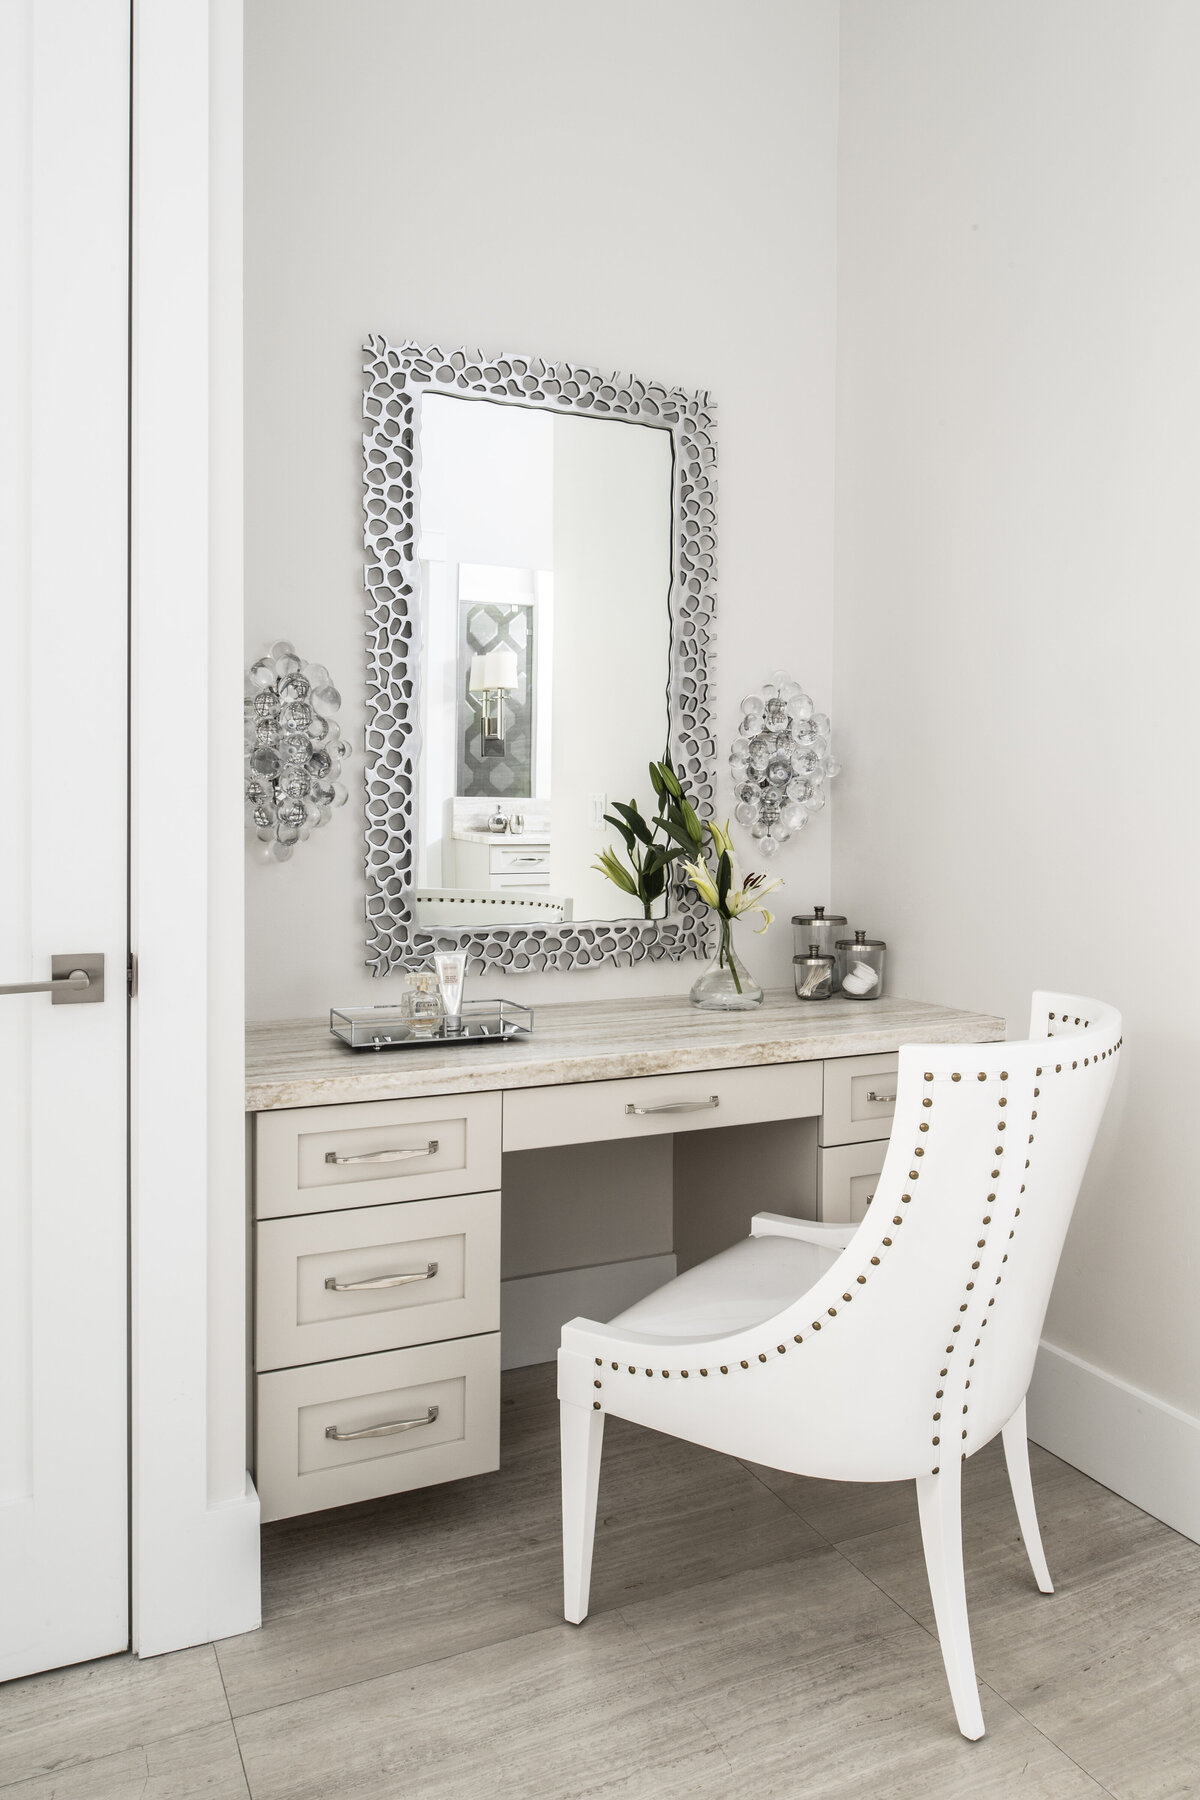 Off White Wall Dresser with Elegant Design Mirror and White Comfy Chair